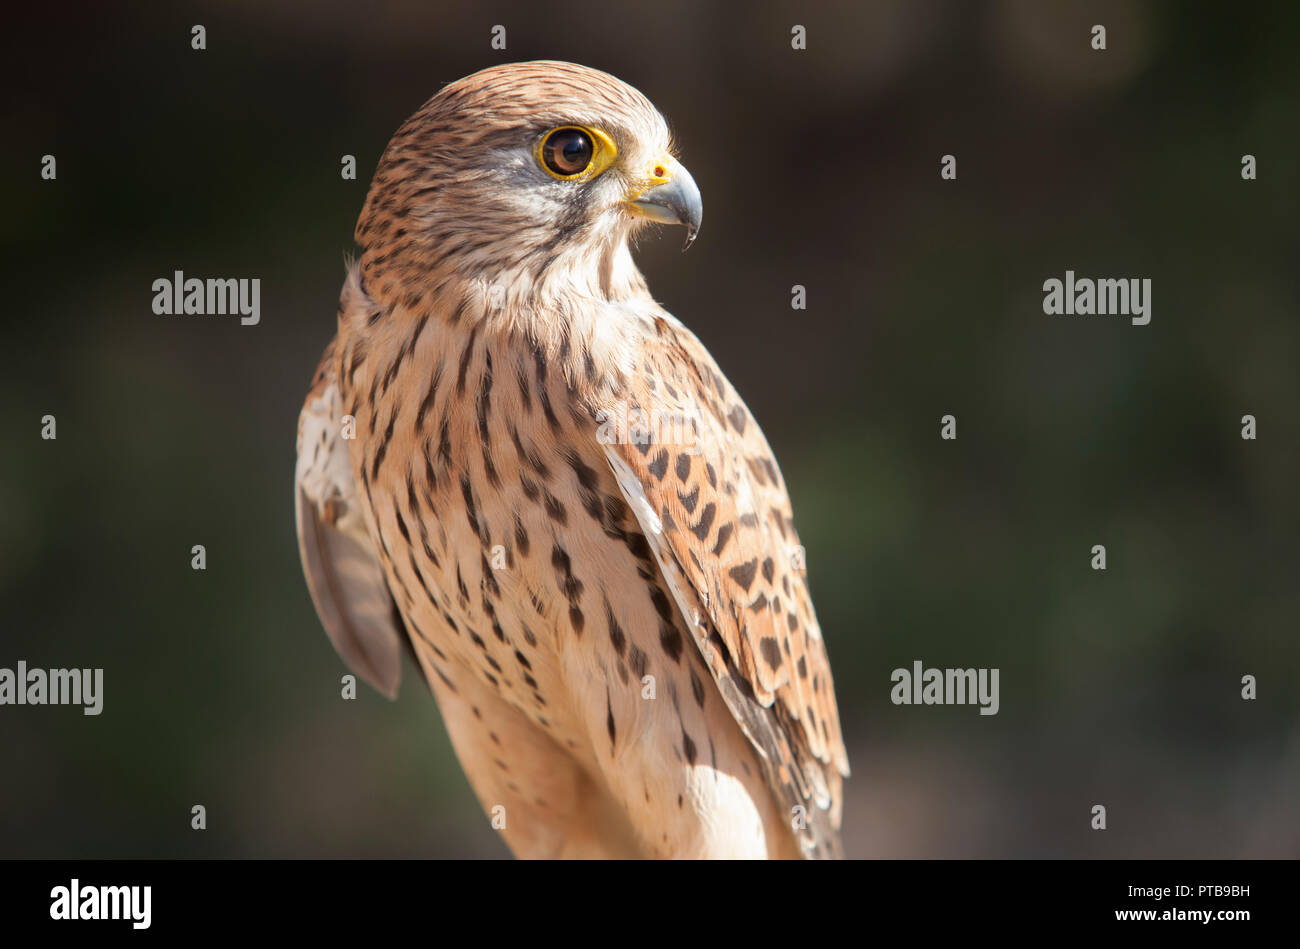 Female Lesser kestrel perched on roost. Wounded animal at bird rescue center, Spain Stock Photo